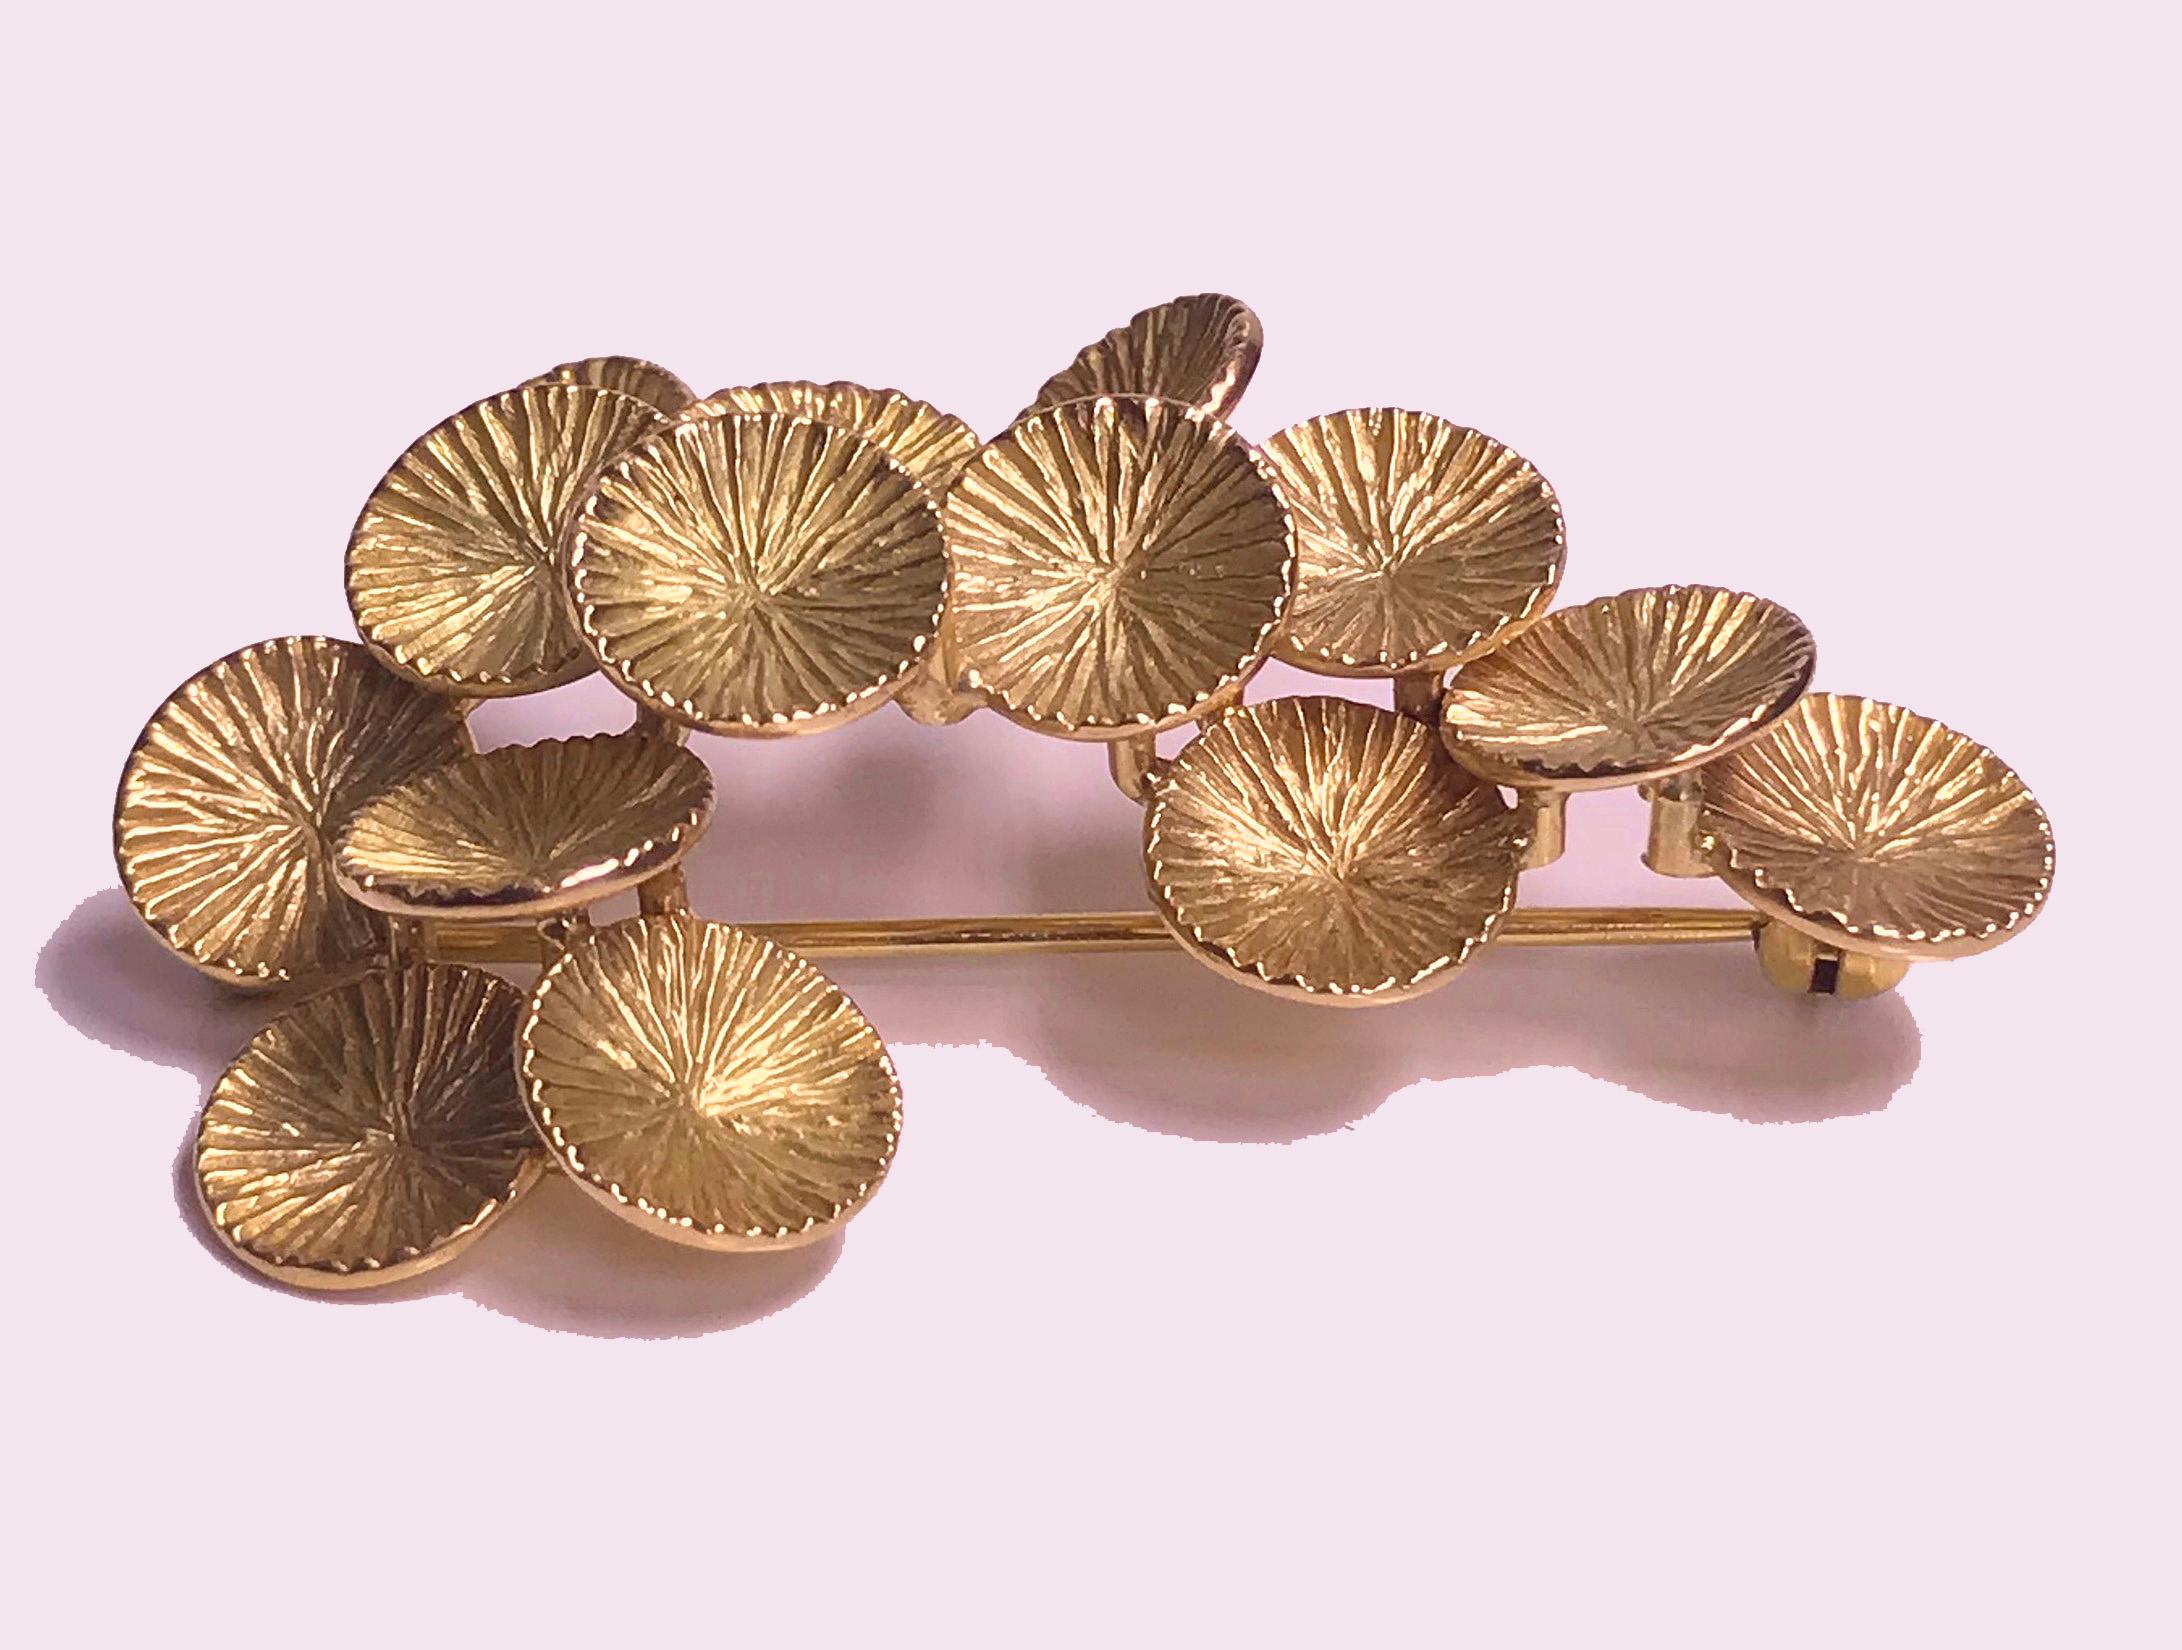 1970's Toni Cavelti Abstract 18K Brooch. The handmade Brooch of textured motif flower petals on branch. Signed to reverse. Measures: 2.5 x 1.0 inches. Item Weight: 9.80 grams.